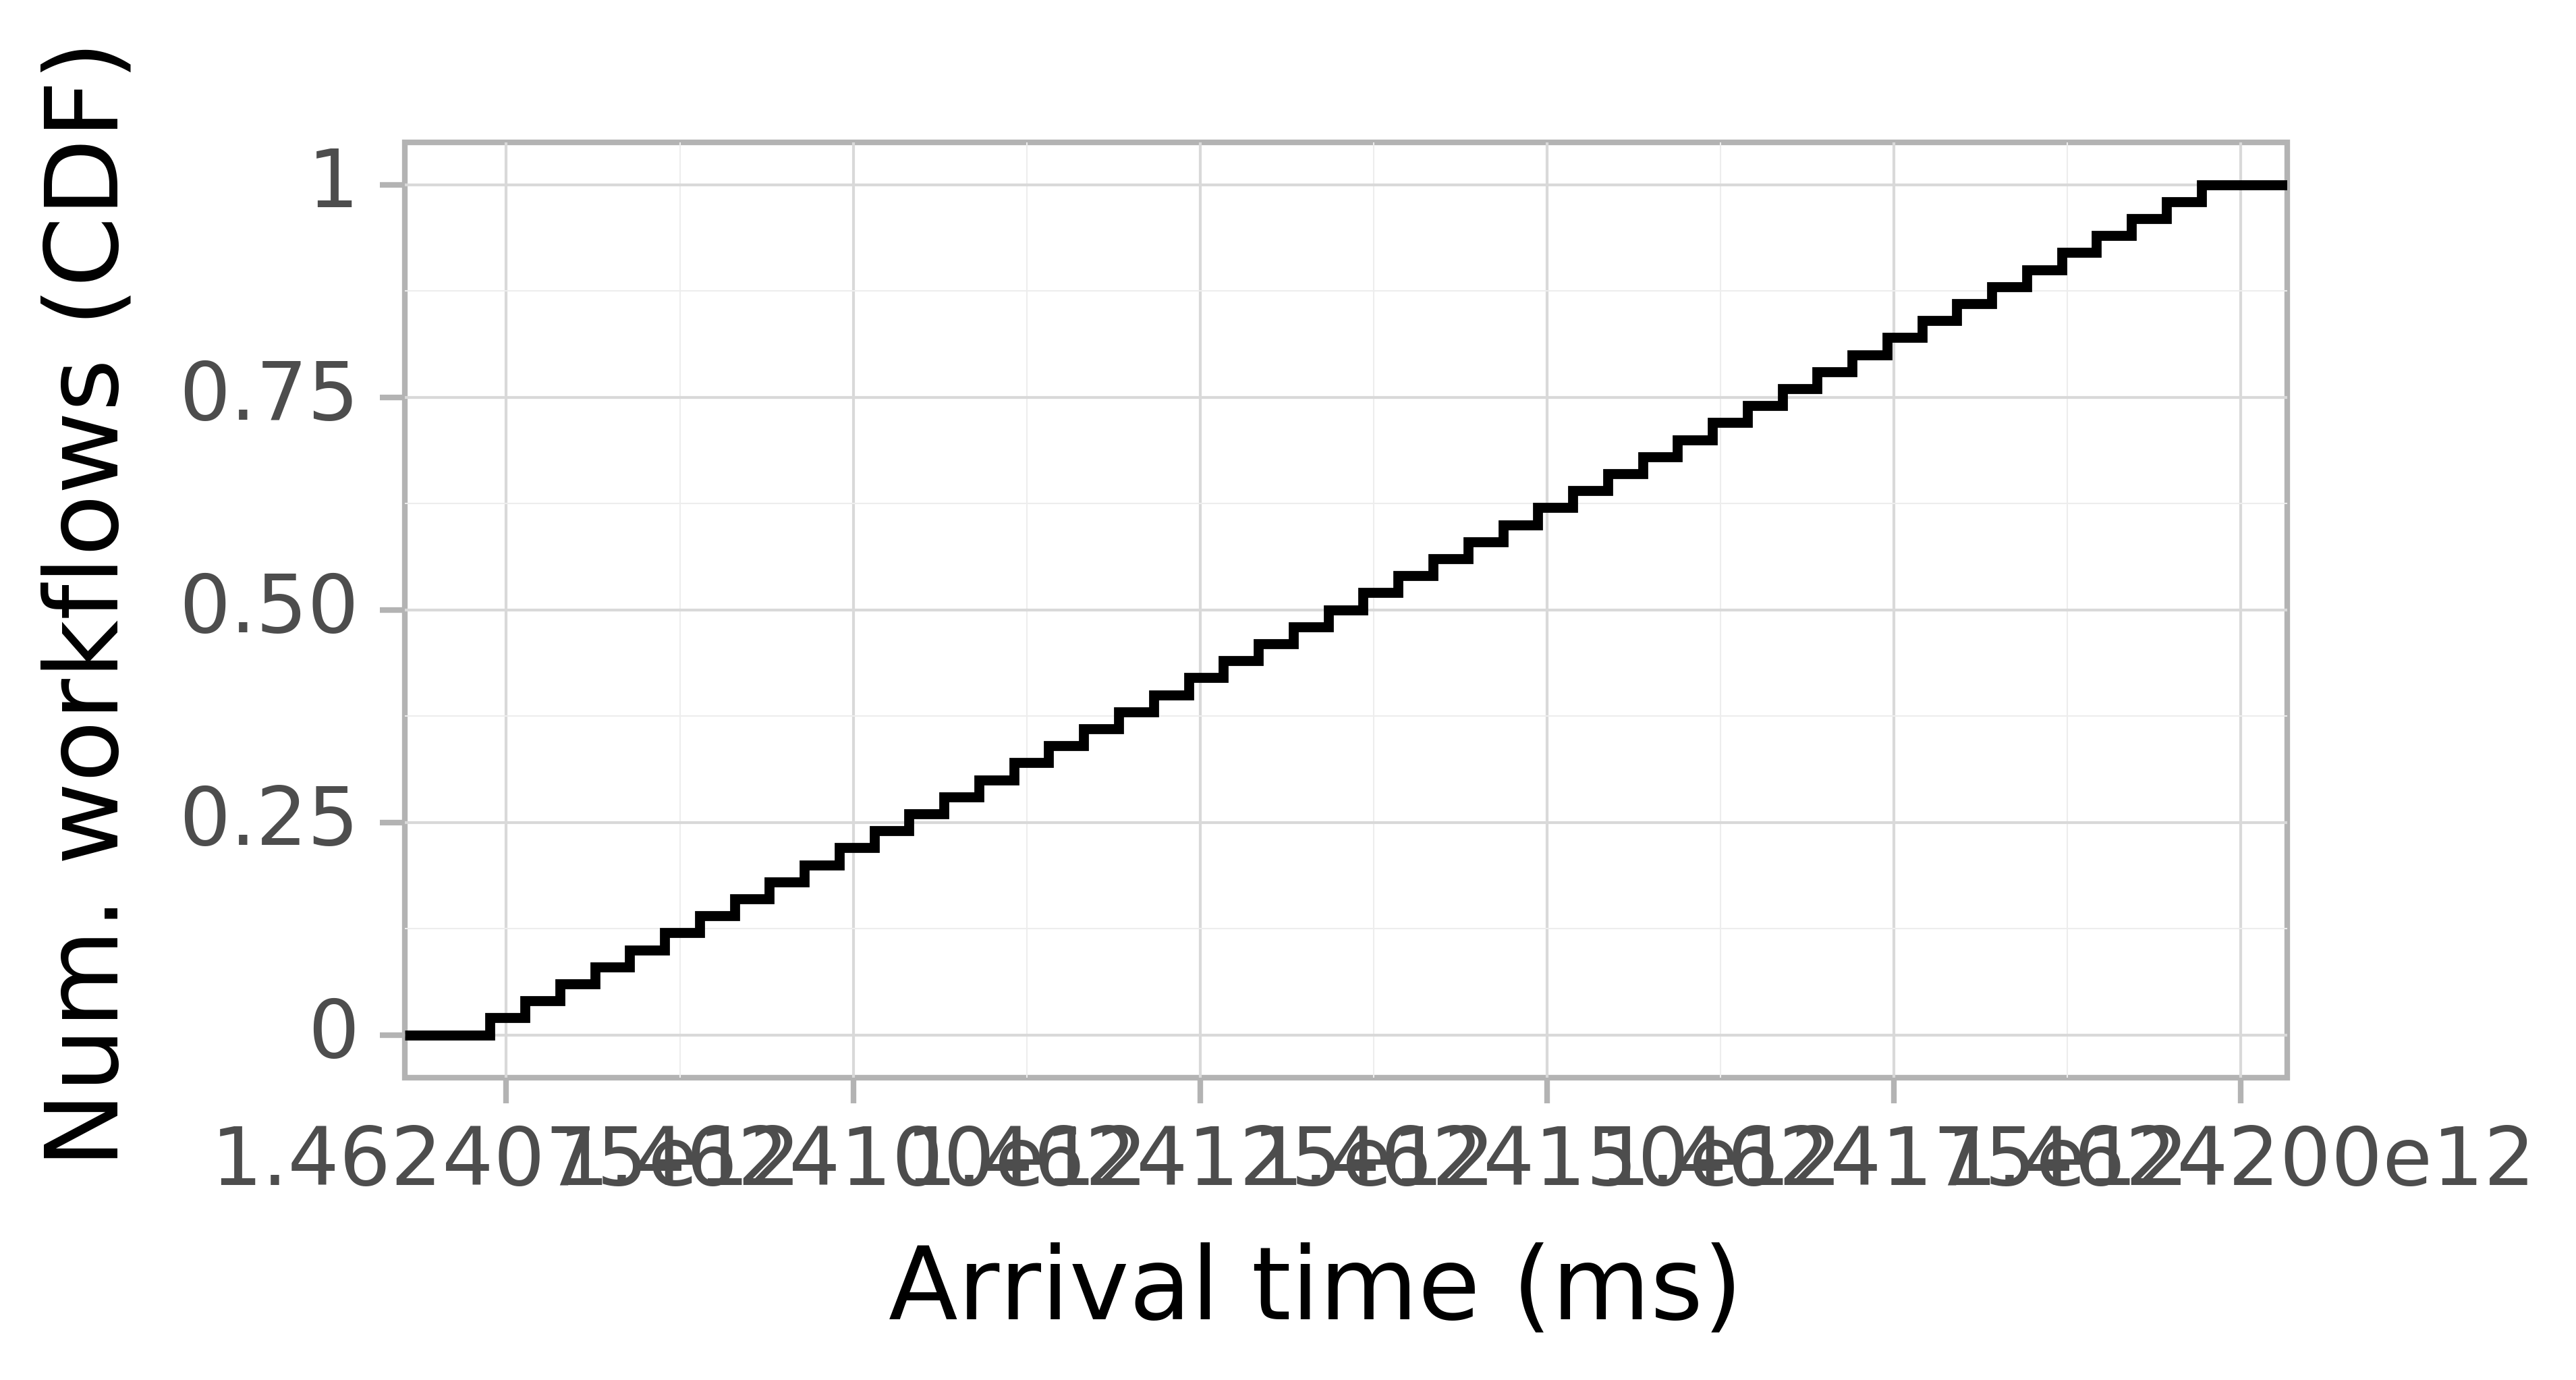 Job arrival CDF graph for the askalon-new_ee39 trace.